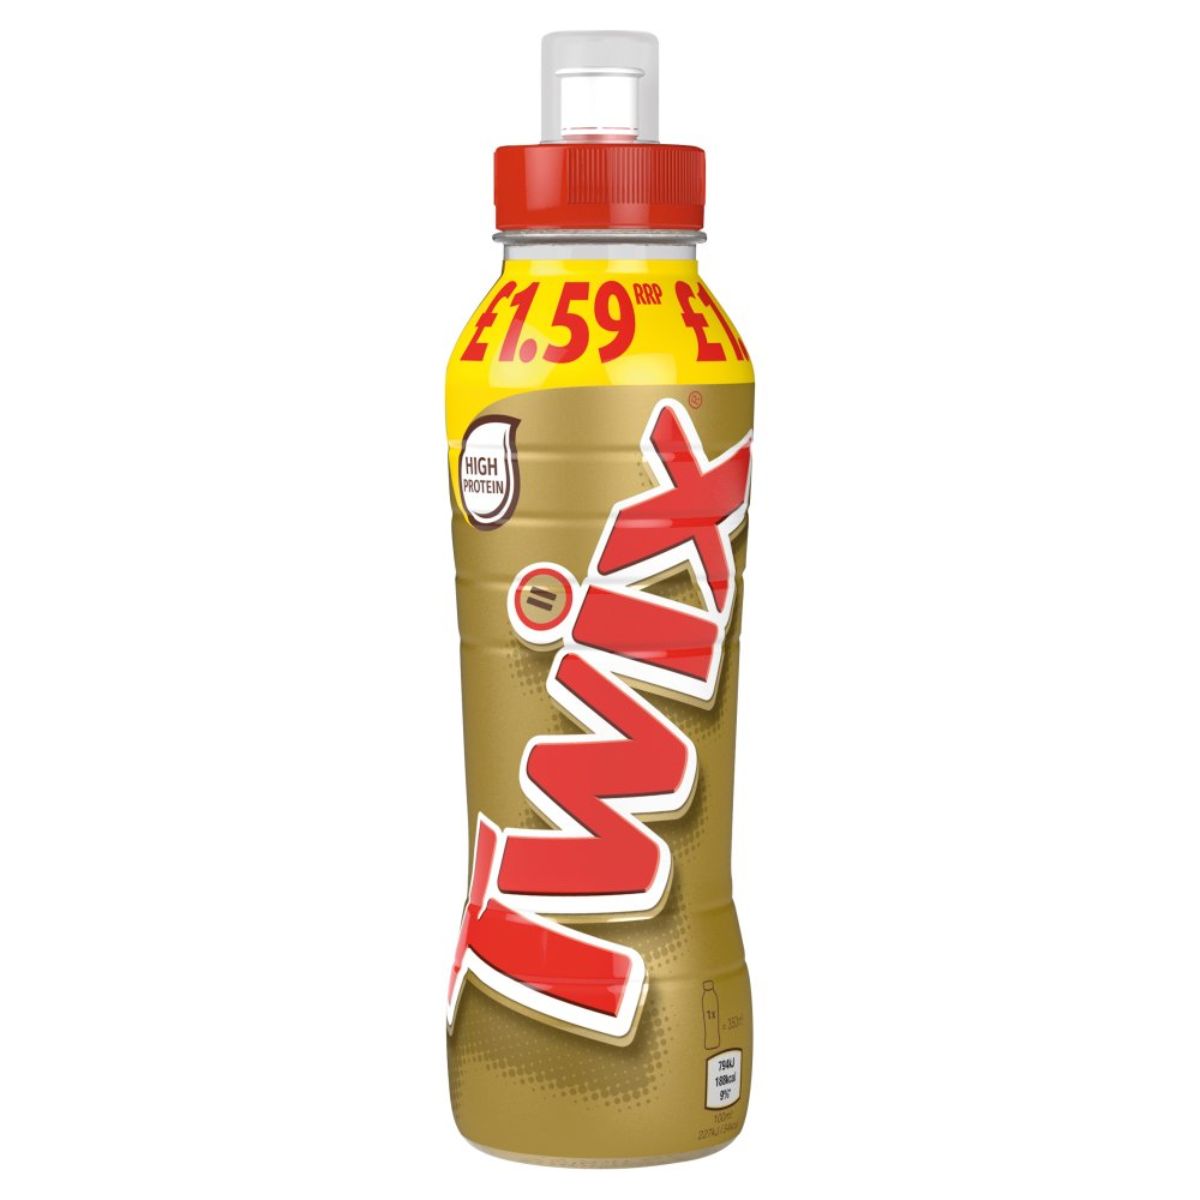 A bottle of Twix - Chocolate Caramel Biscuit Milk Shake Drink - 350ml on a white background.